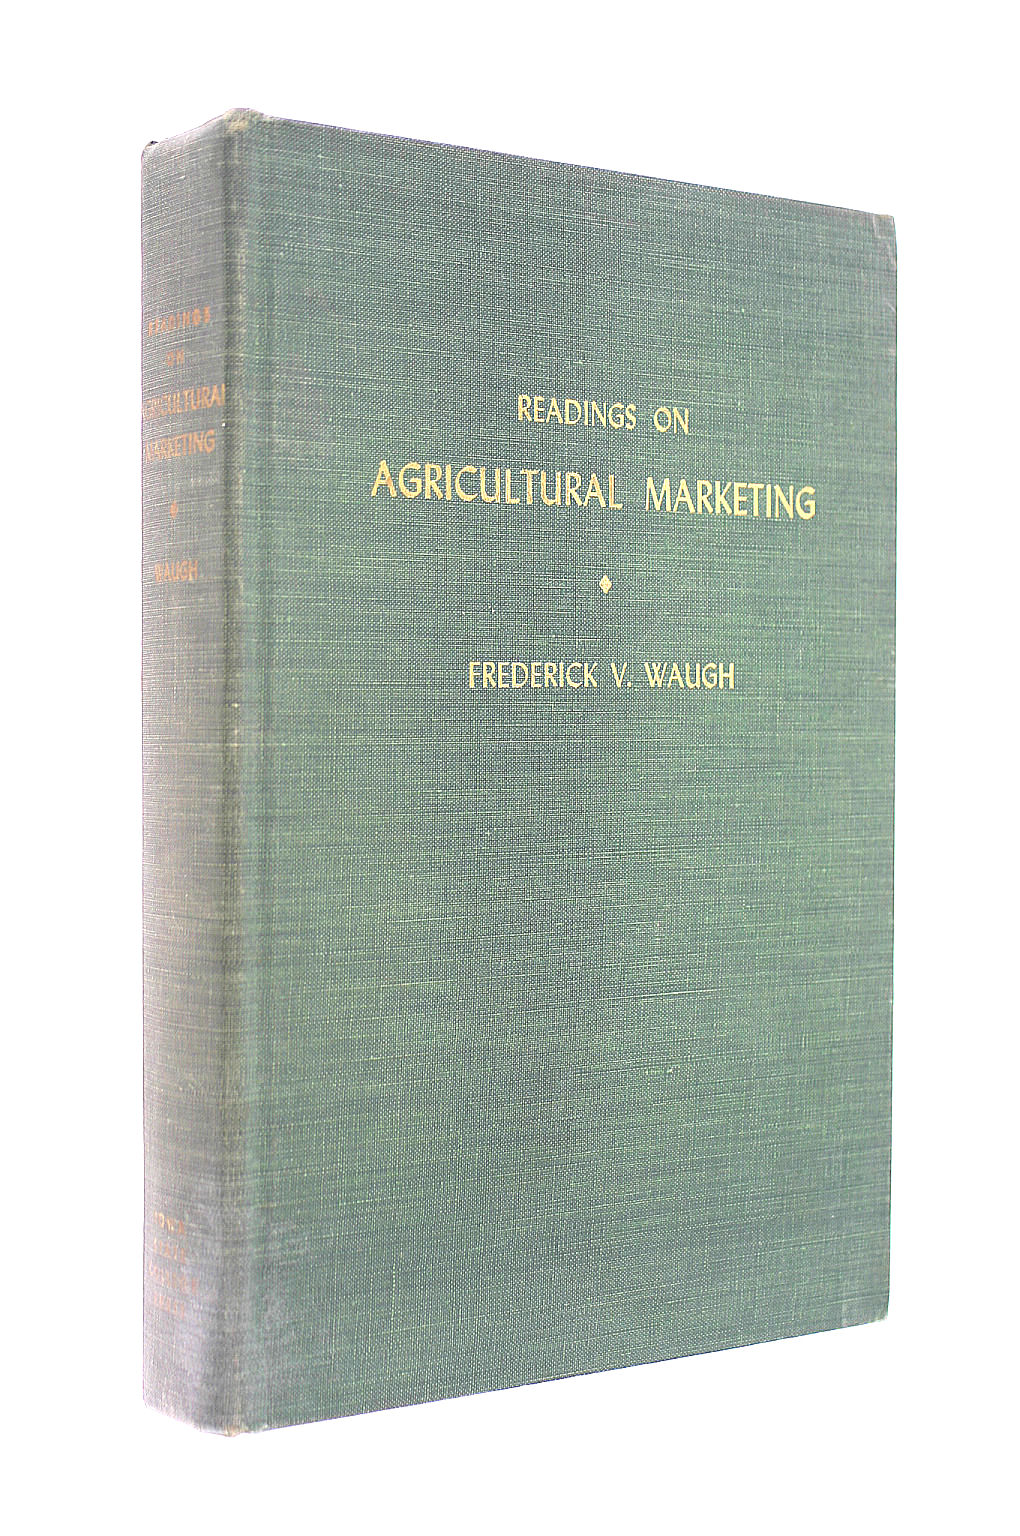 WAUGH, FREDERICK V. ED. - Readings on Agricultural Marketing.